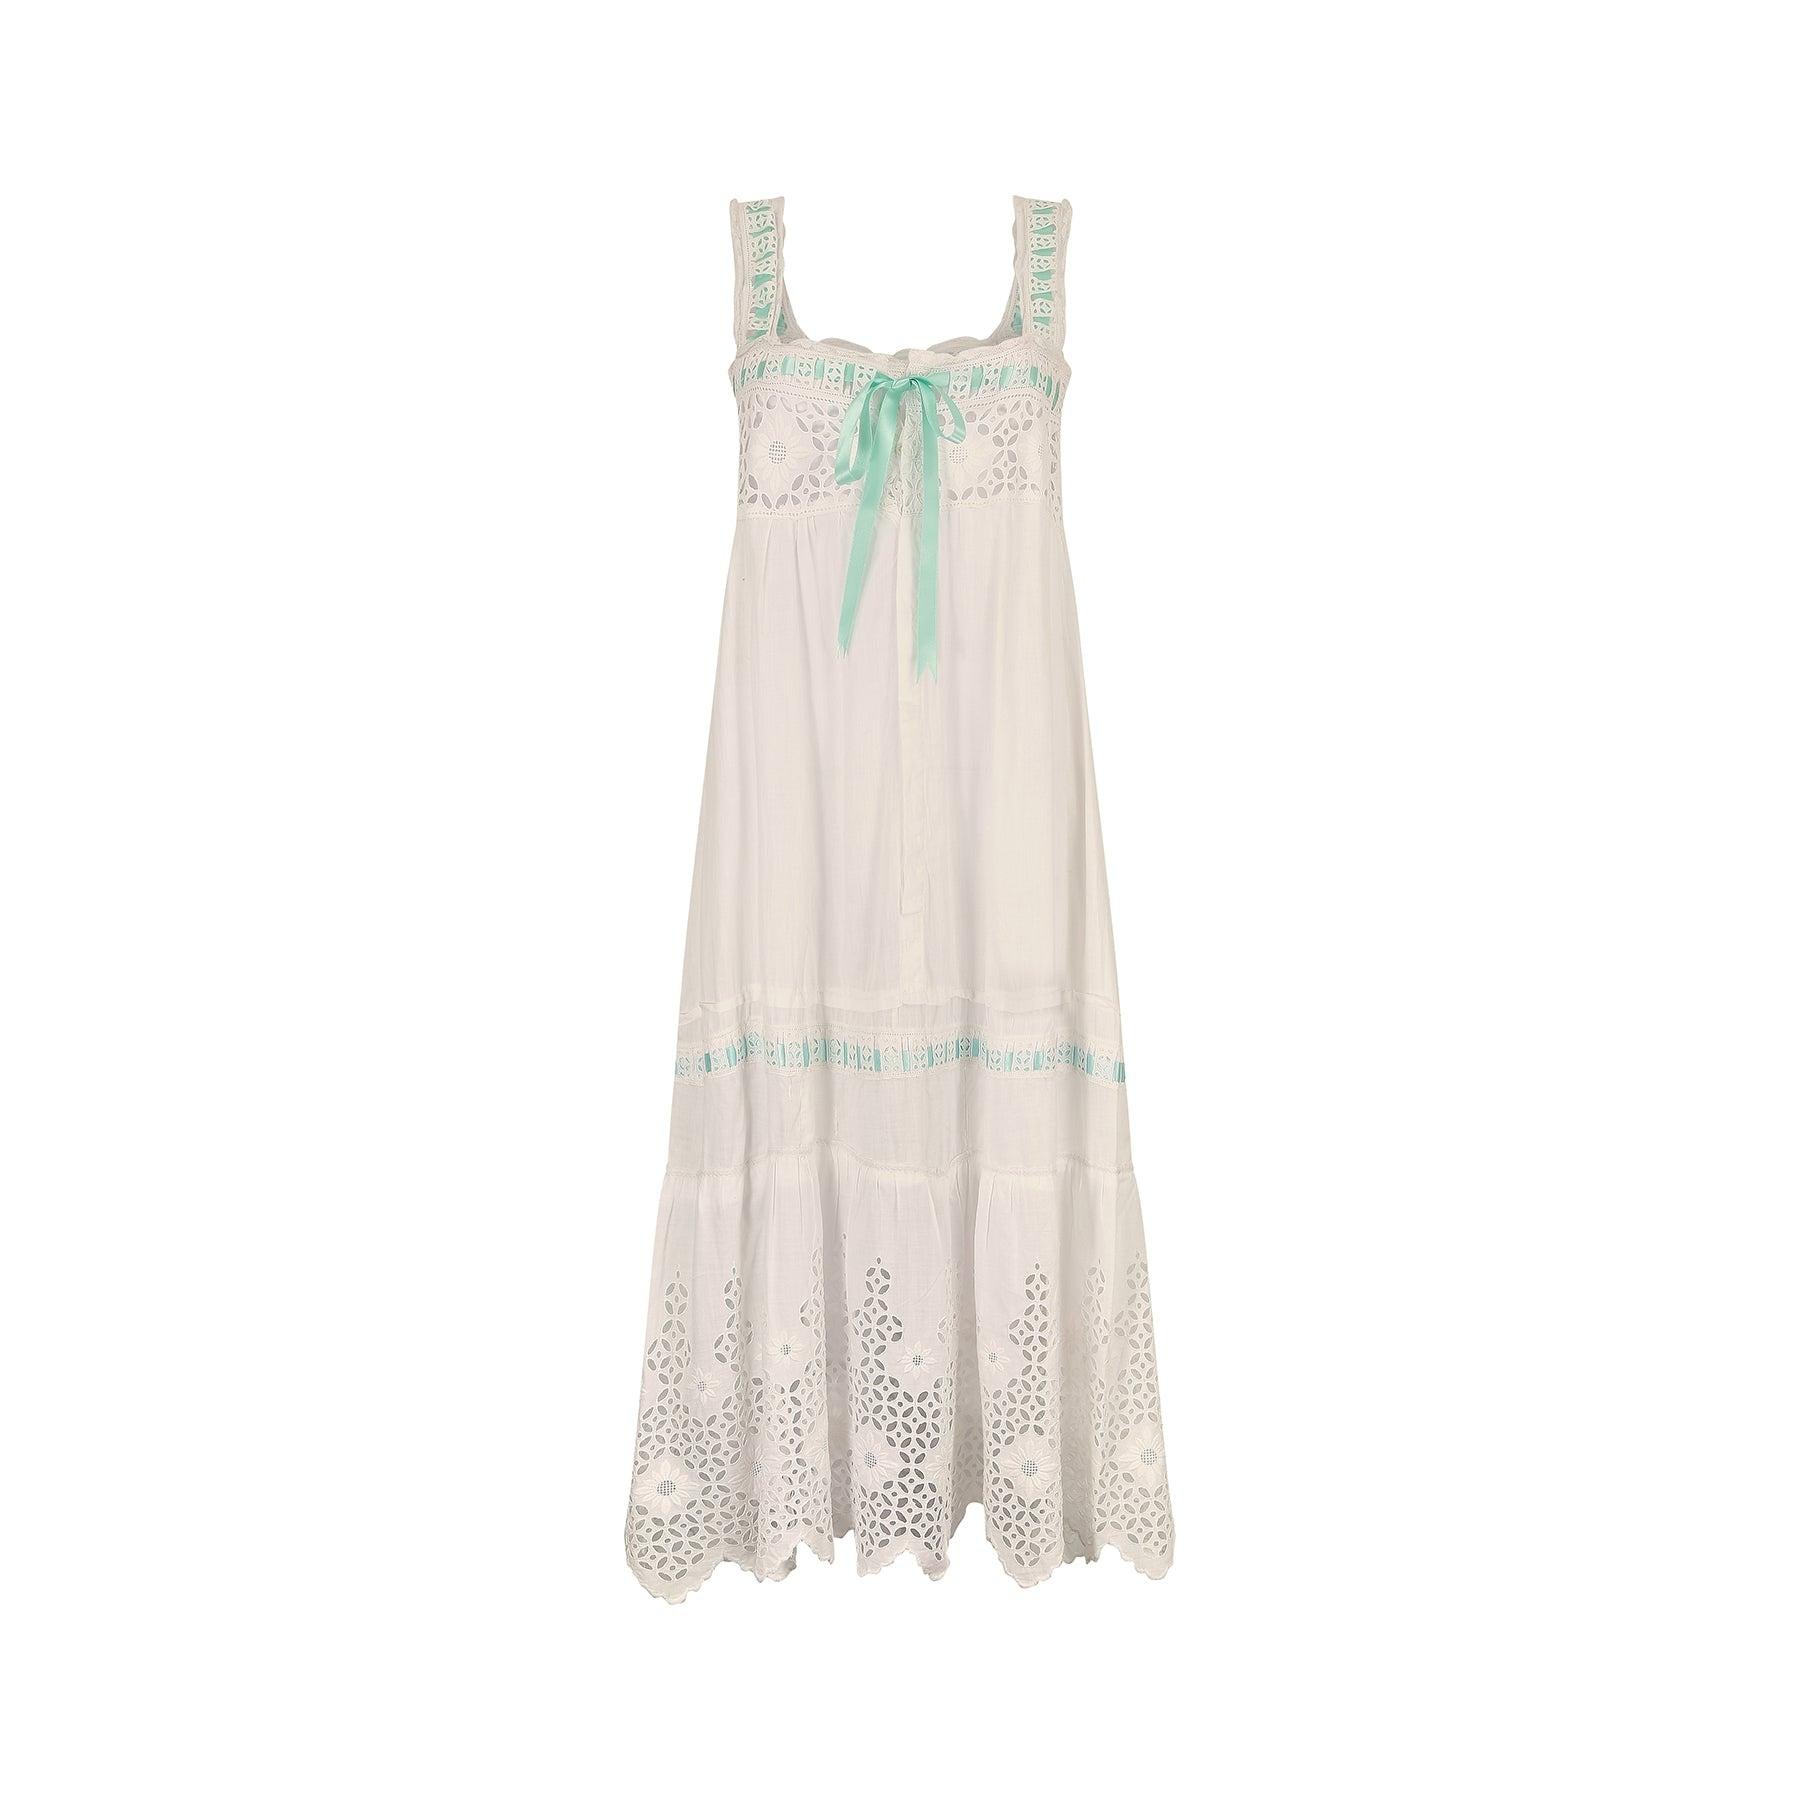 This is a really good 1920s cotton whitework slip dress. It is incredibly detailed and the execution of the eyelet work is exceptional. The dress may have been an underdress for a tea gown but was probably worn as nightwear and features this eyelet